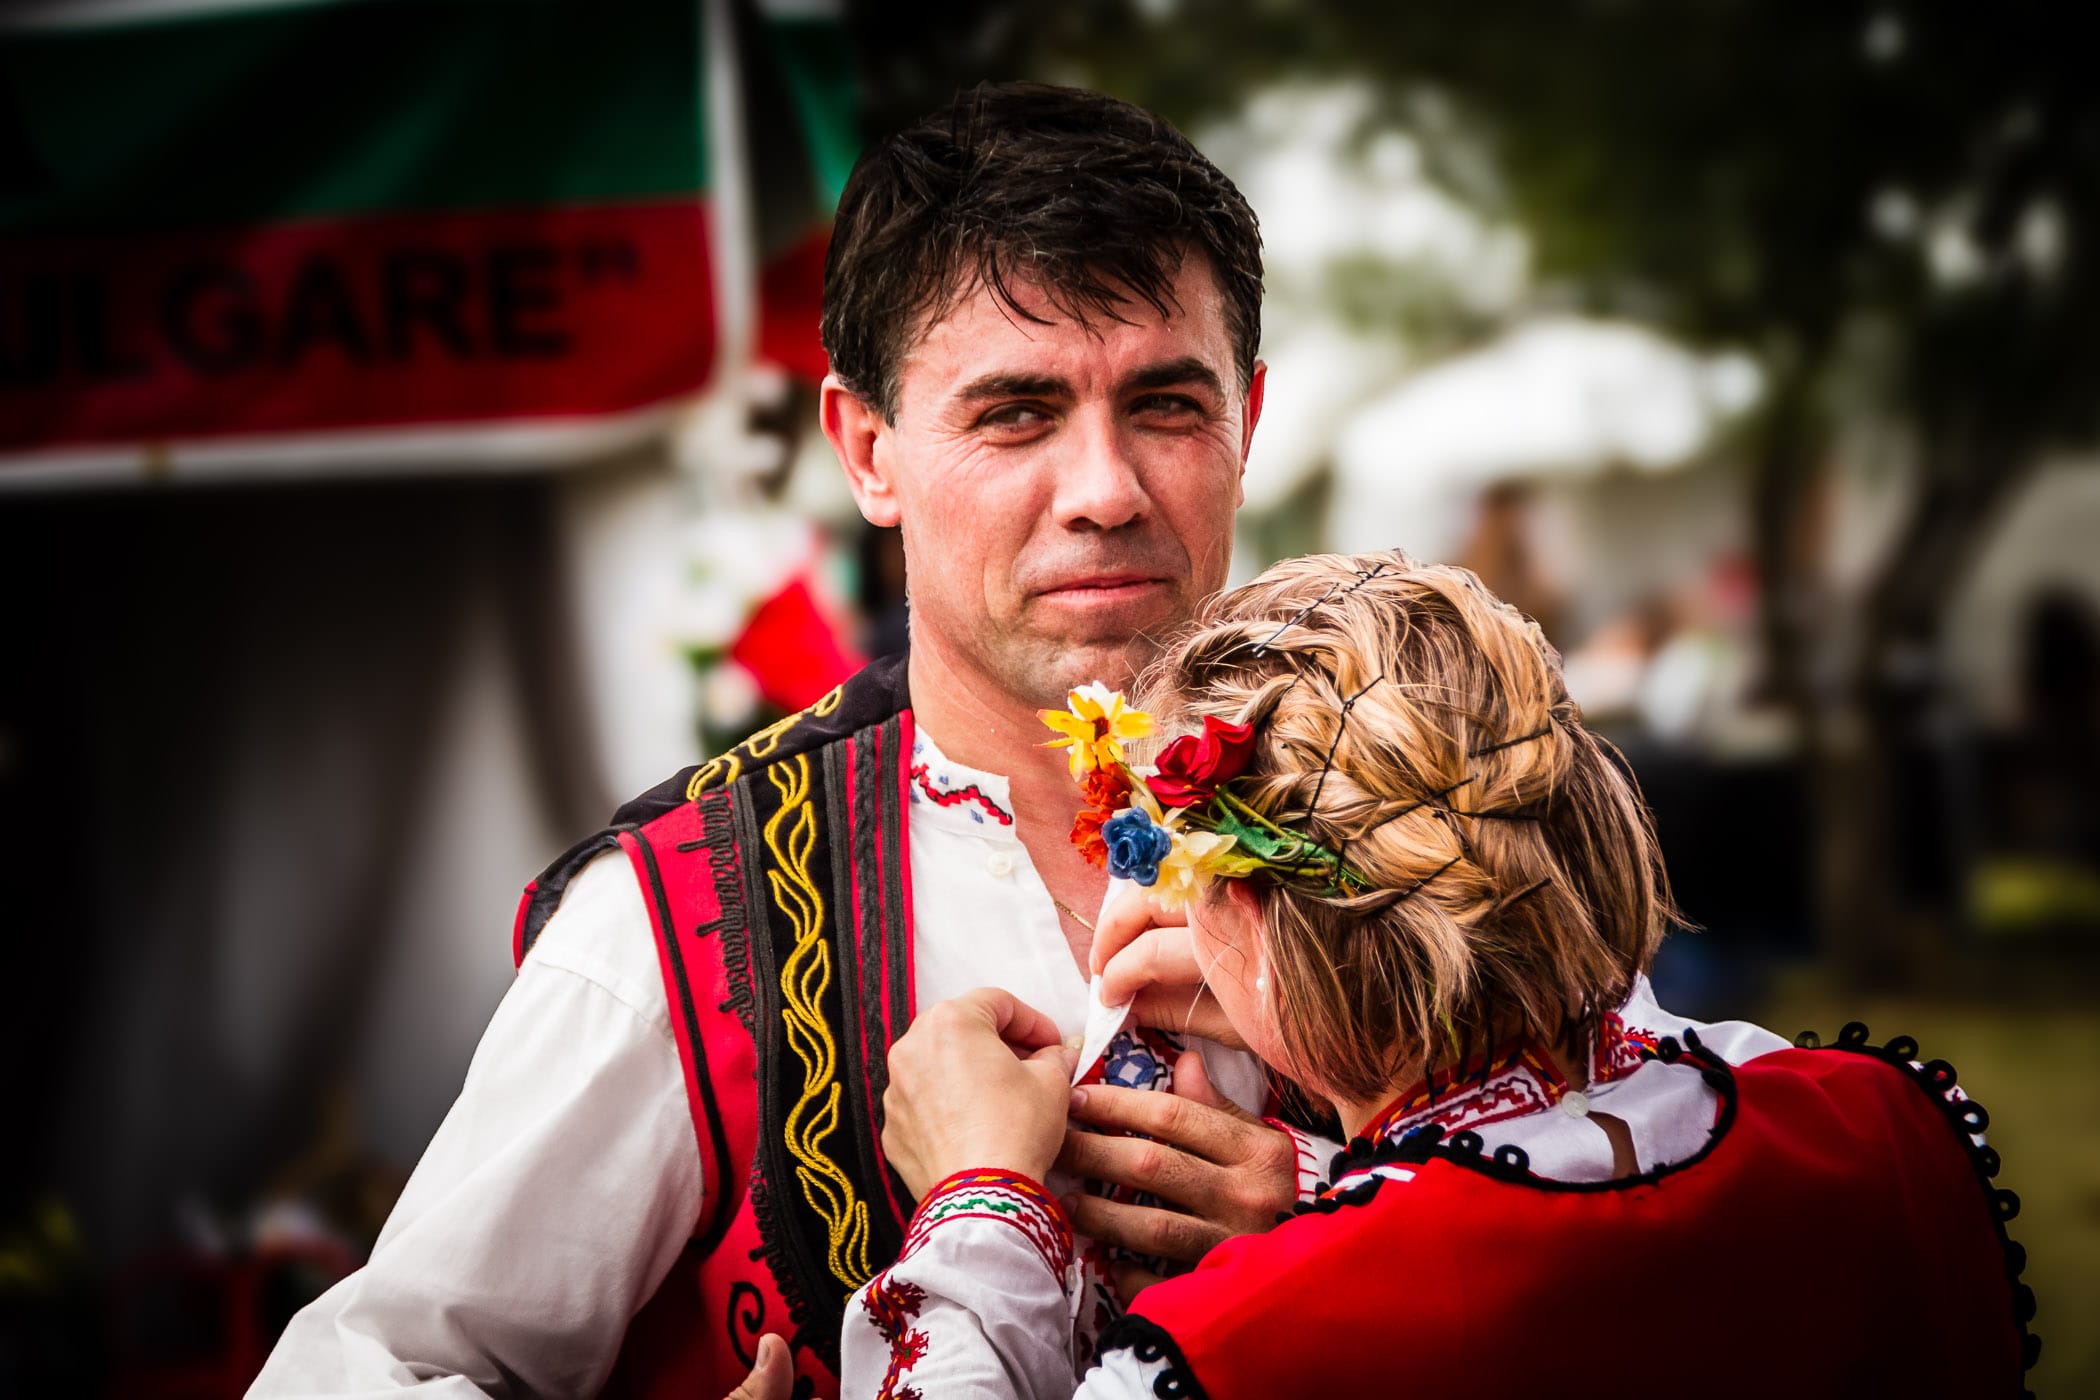 A Bulgarian dancer's traditional costume is adjusted by his companion at Addison Worldfest, Addison, Texas.